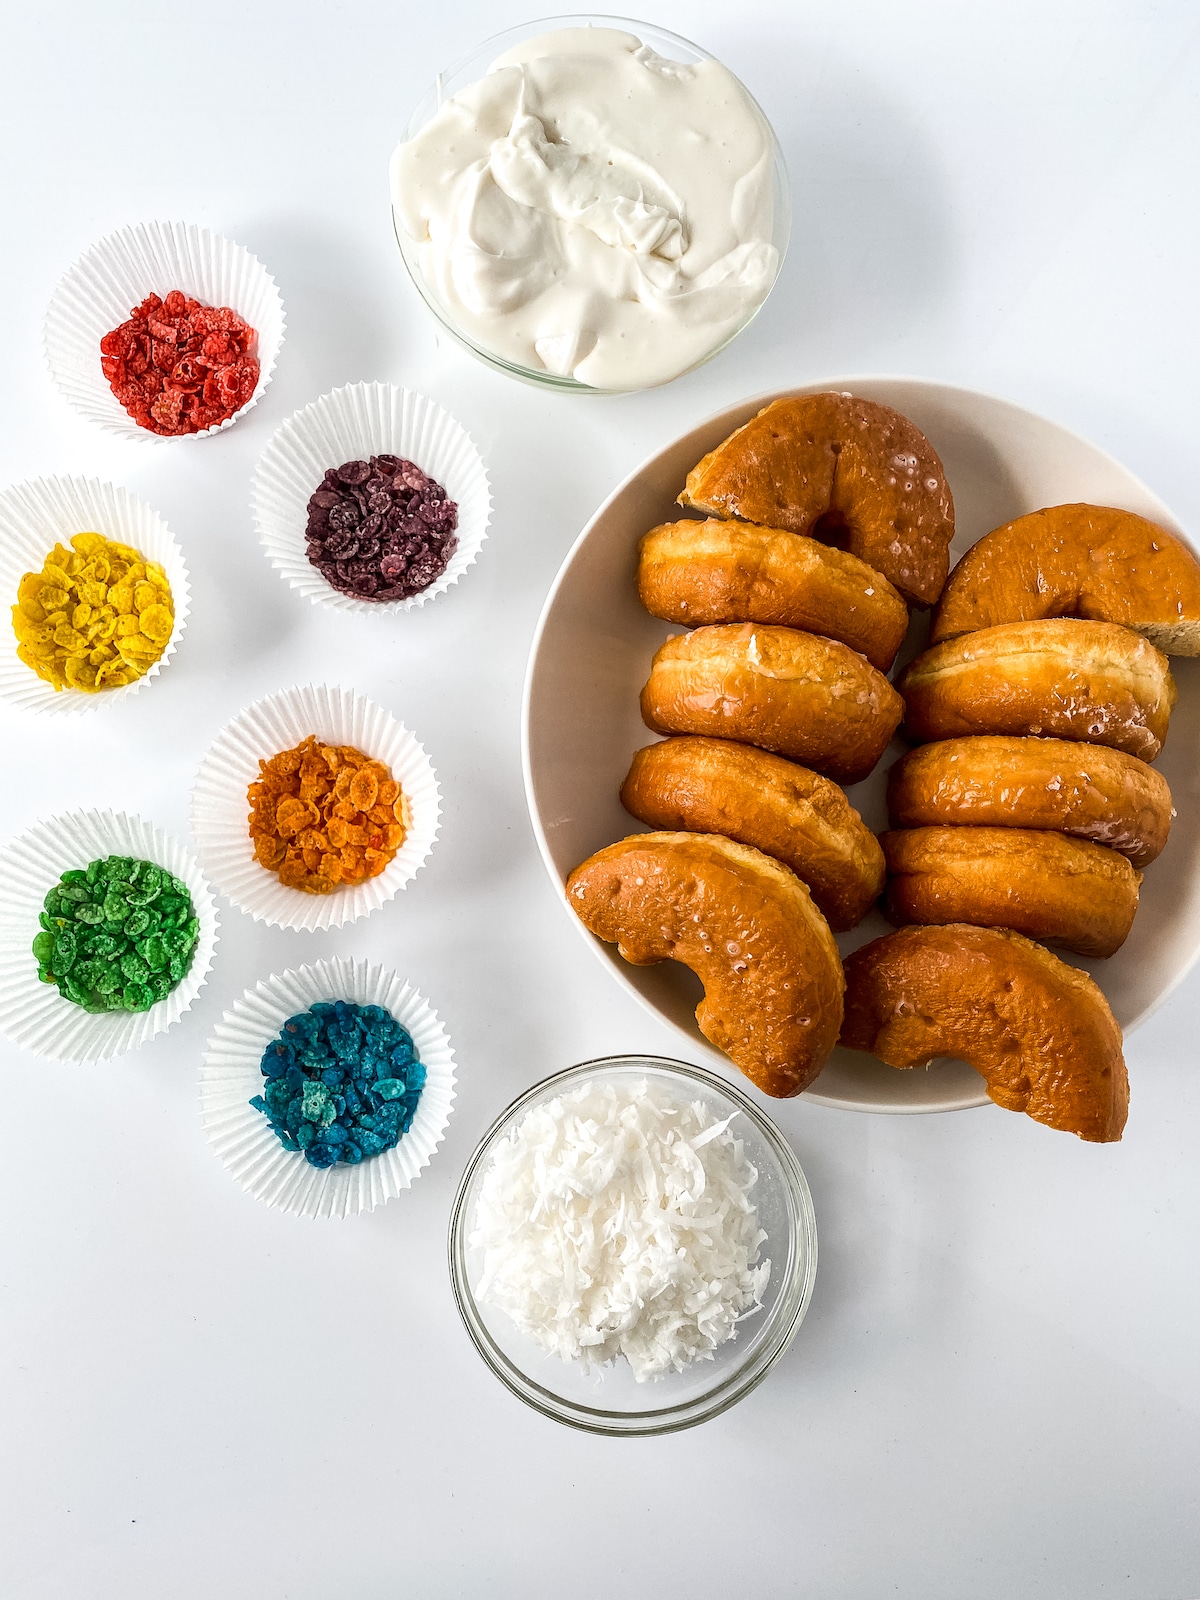 Ingredients for rainbow donuts